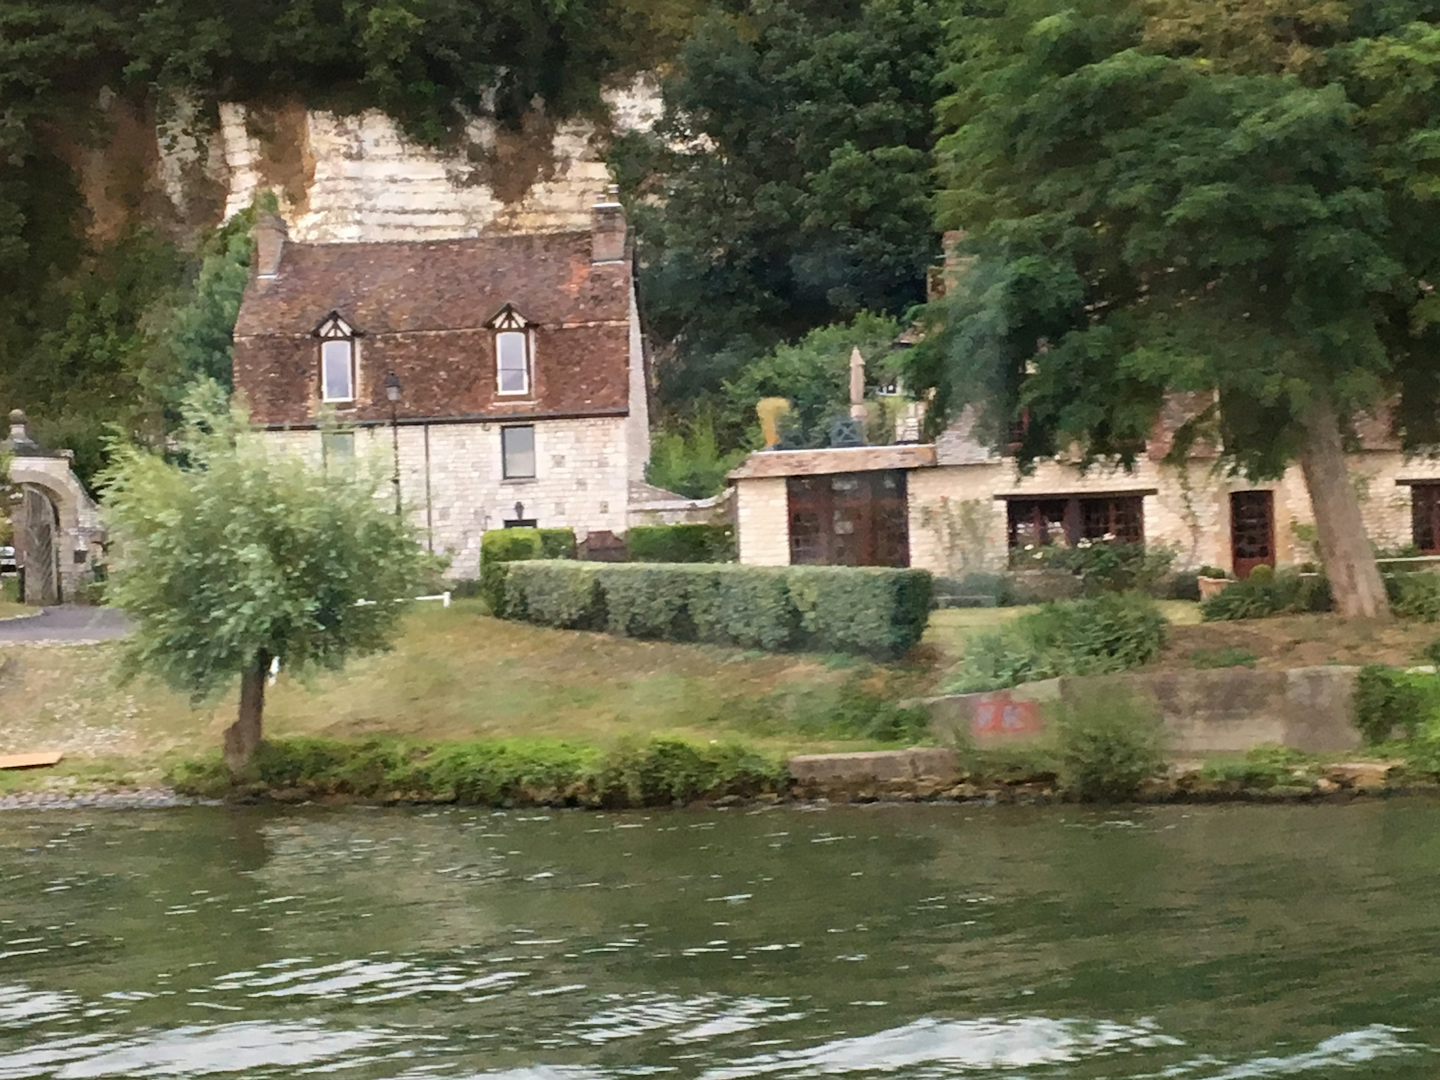 Homes along the Seine as seen from the longboat